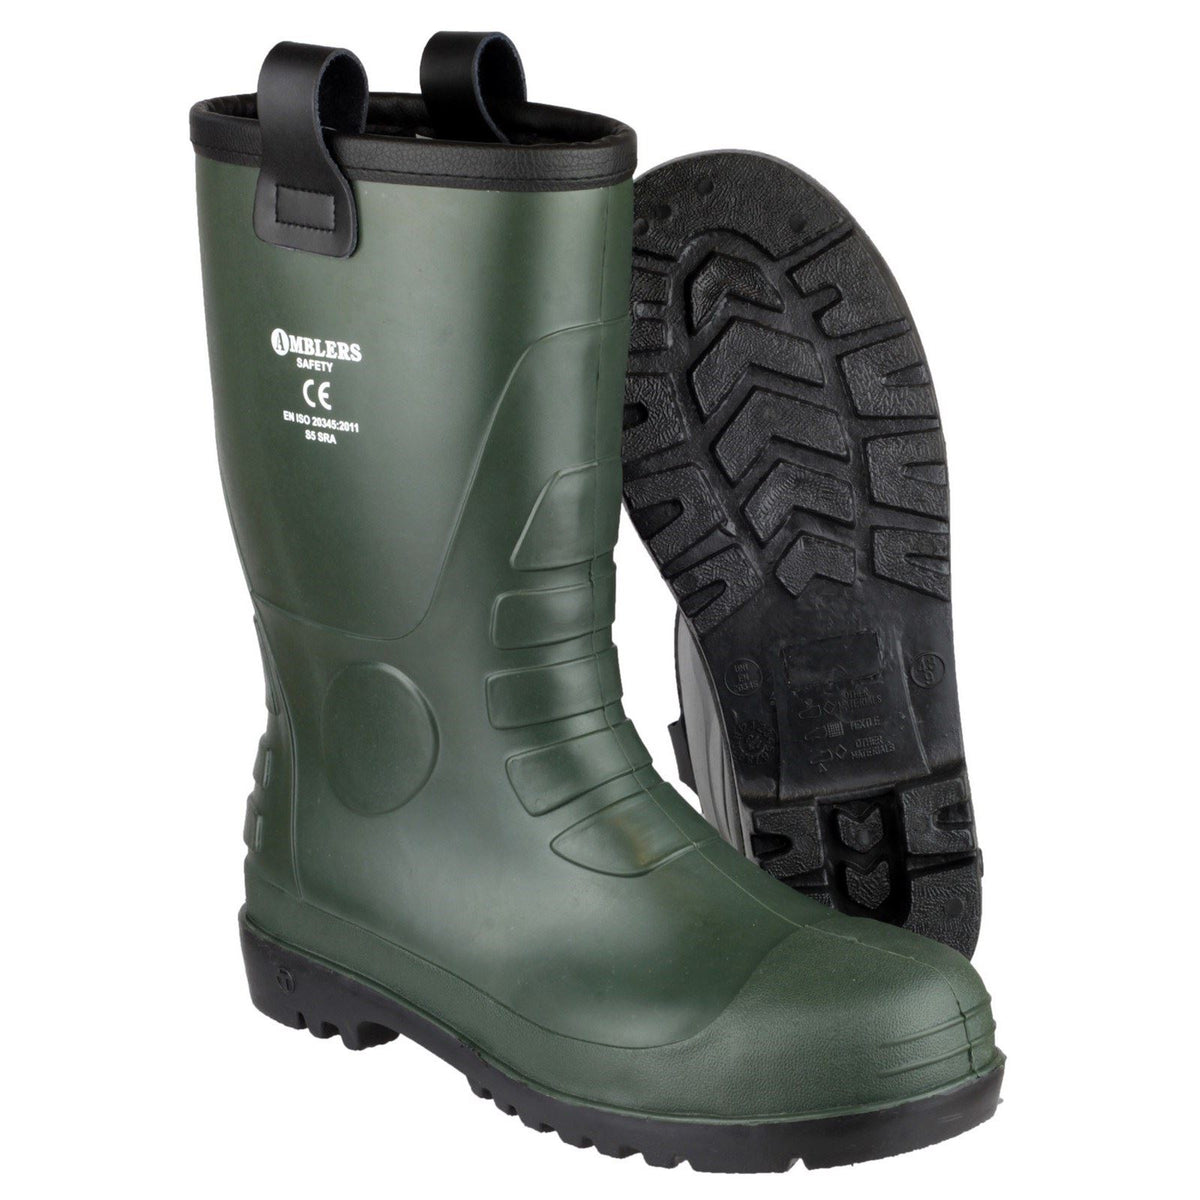 Amblers Safety FS97 PVC Rigger Safety Boots